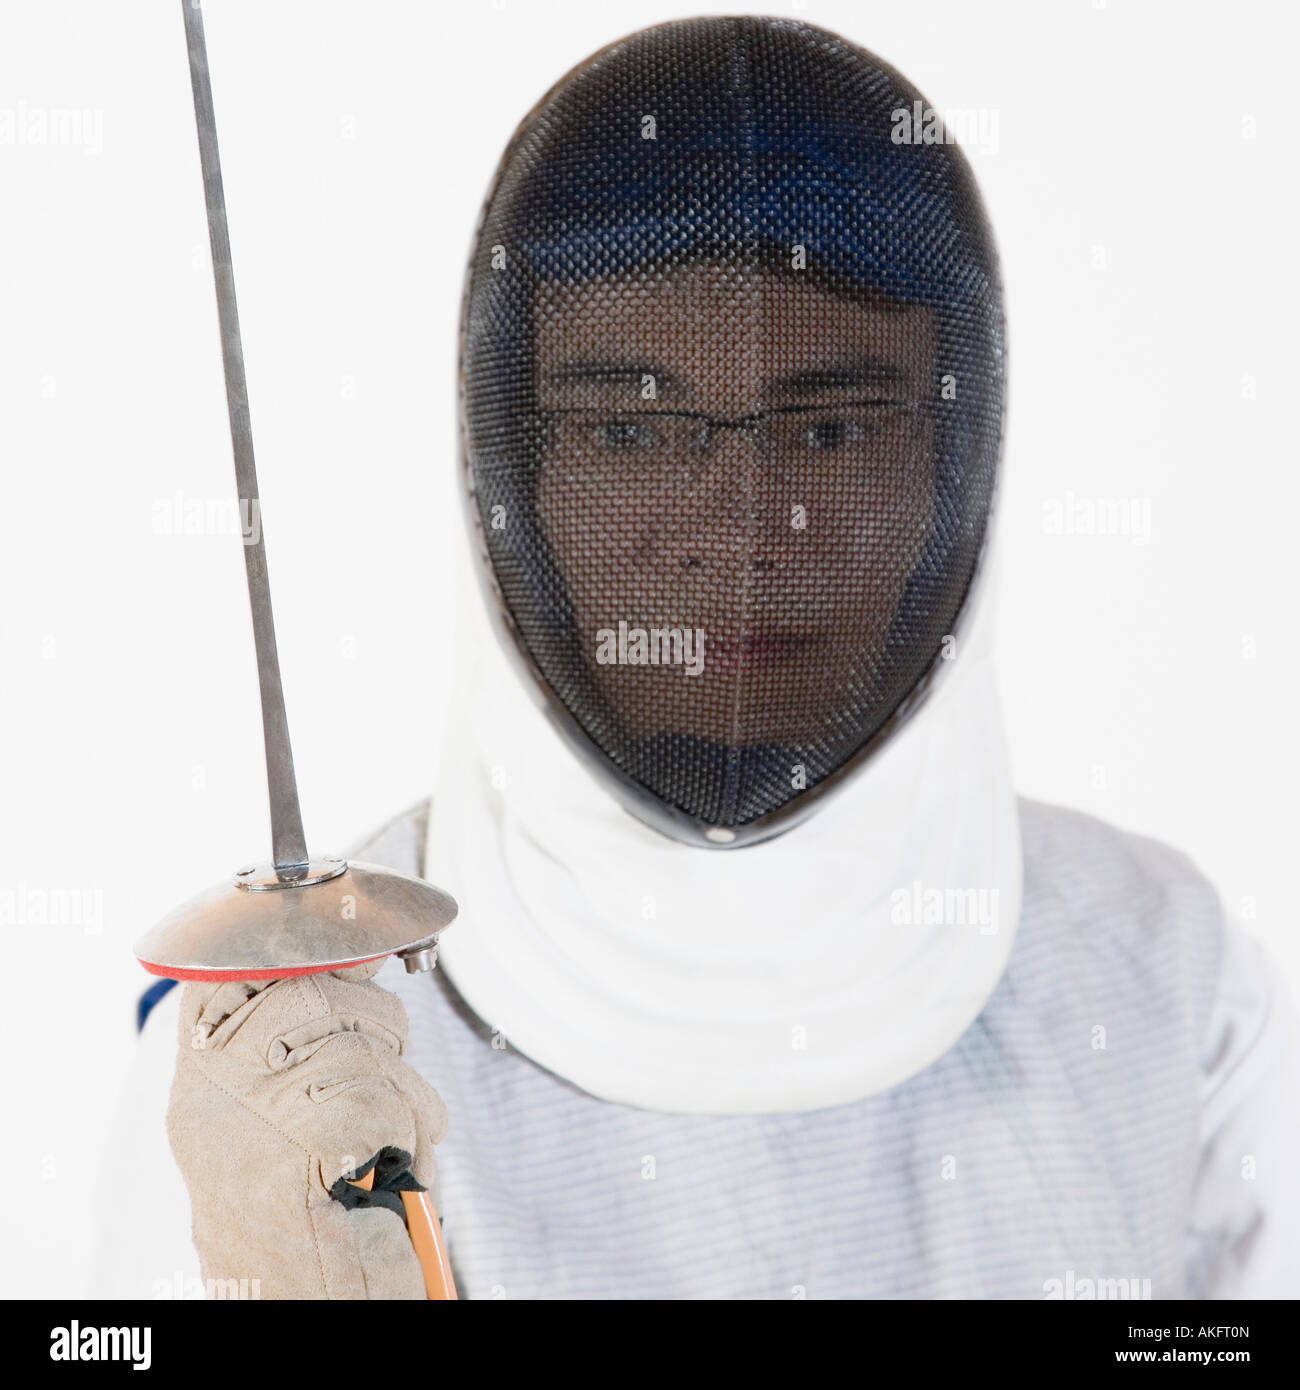 Portrait of a male fencer wearing fencing mask and holding a fencing foil Stock Photo